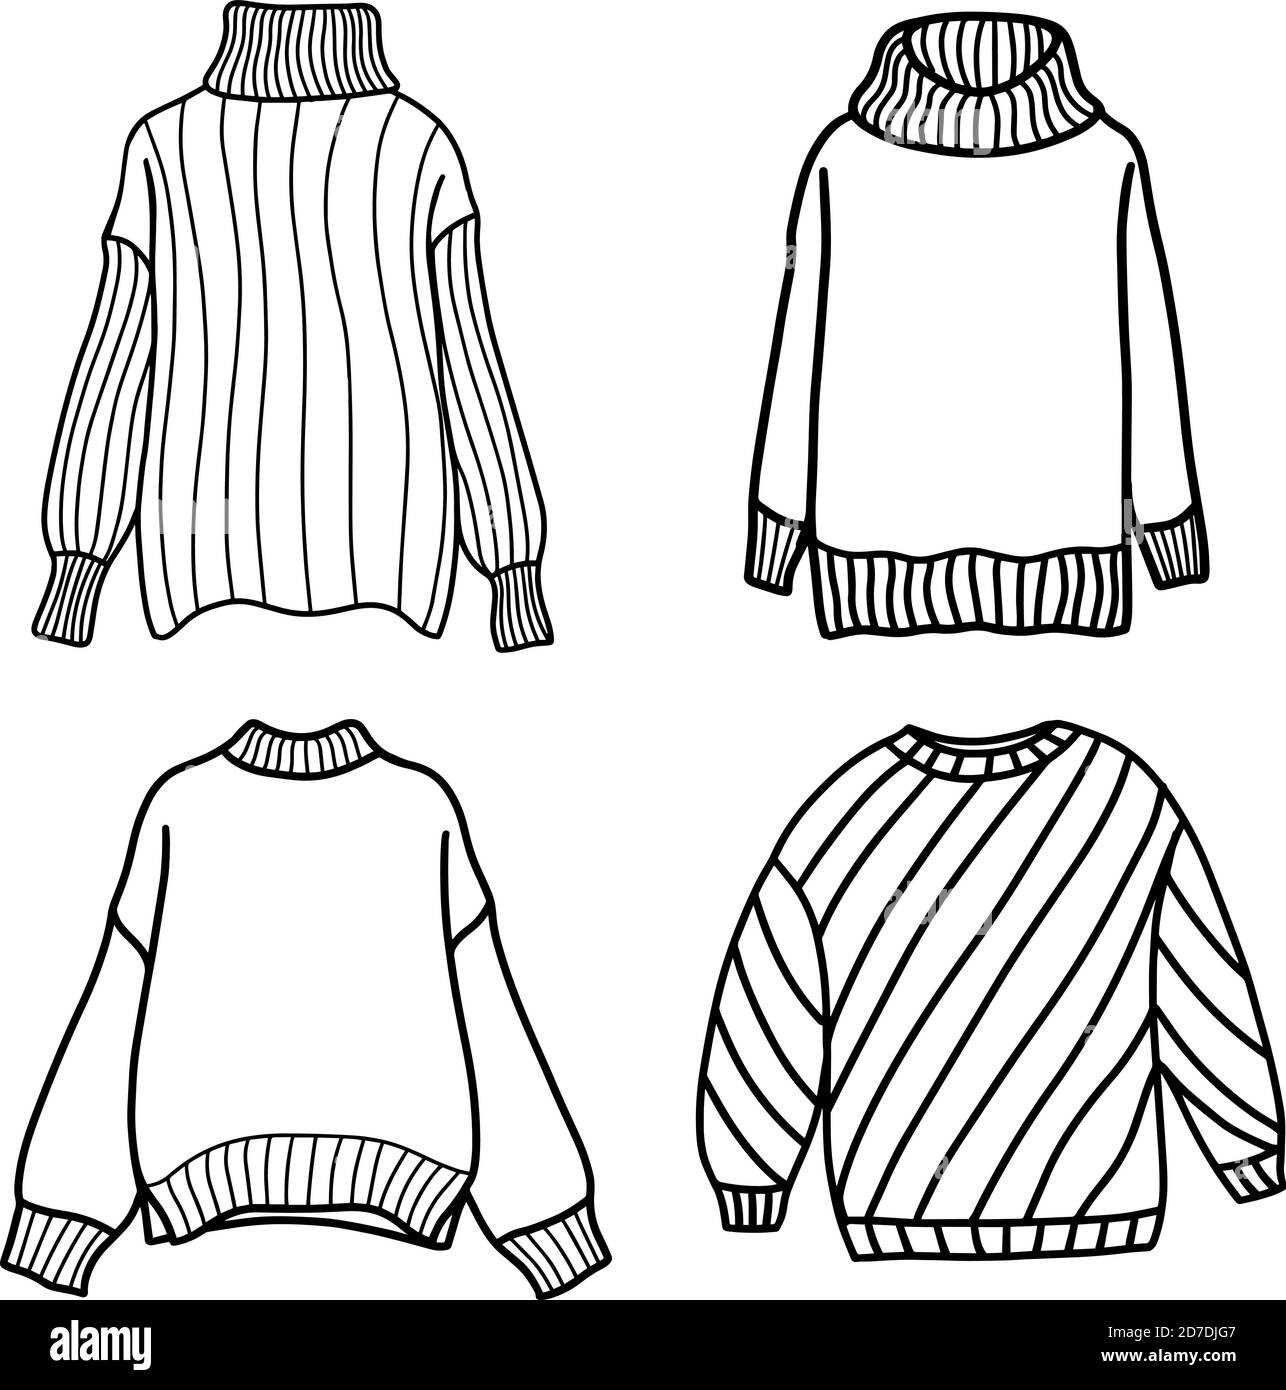 Set of knitted sweaters and jumpers Doodle style Stock Vector Image ...